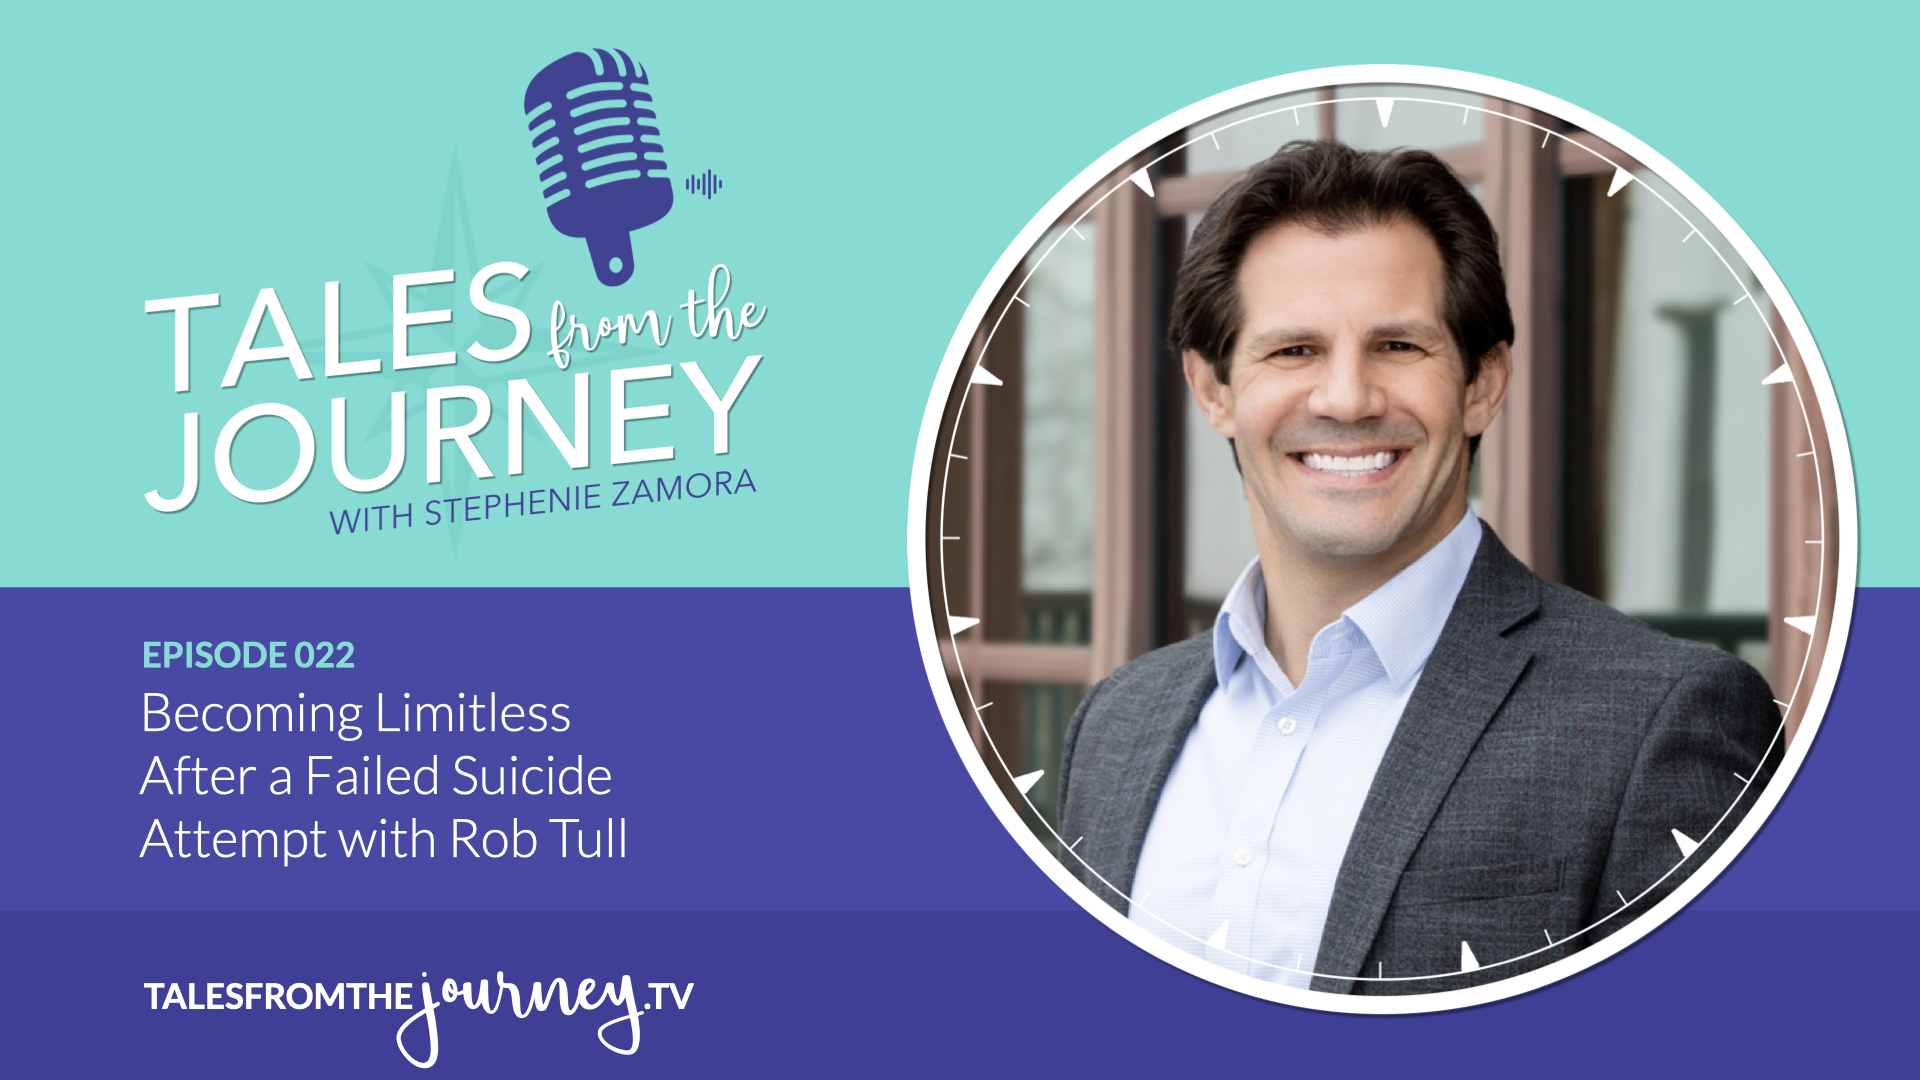 Becoming Limitless After a Failed Suicide Attempt with Rob Tull